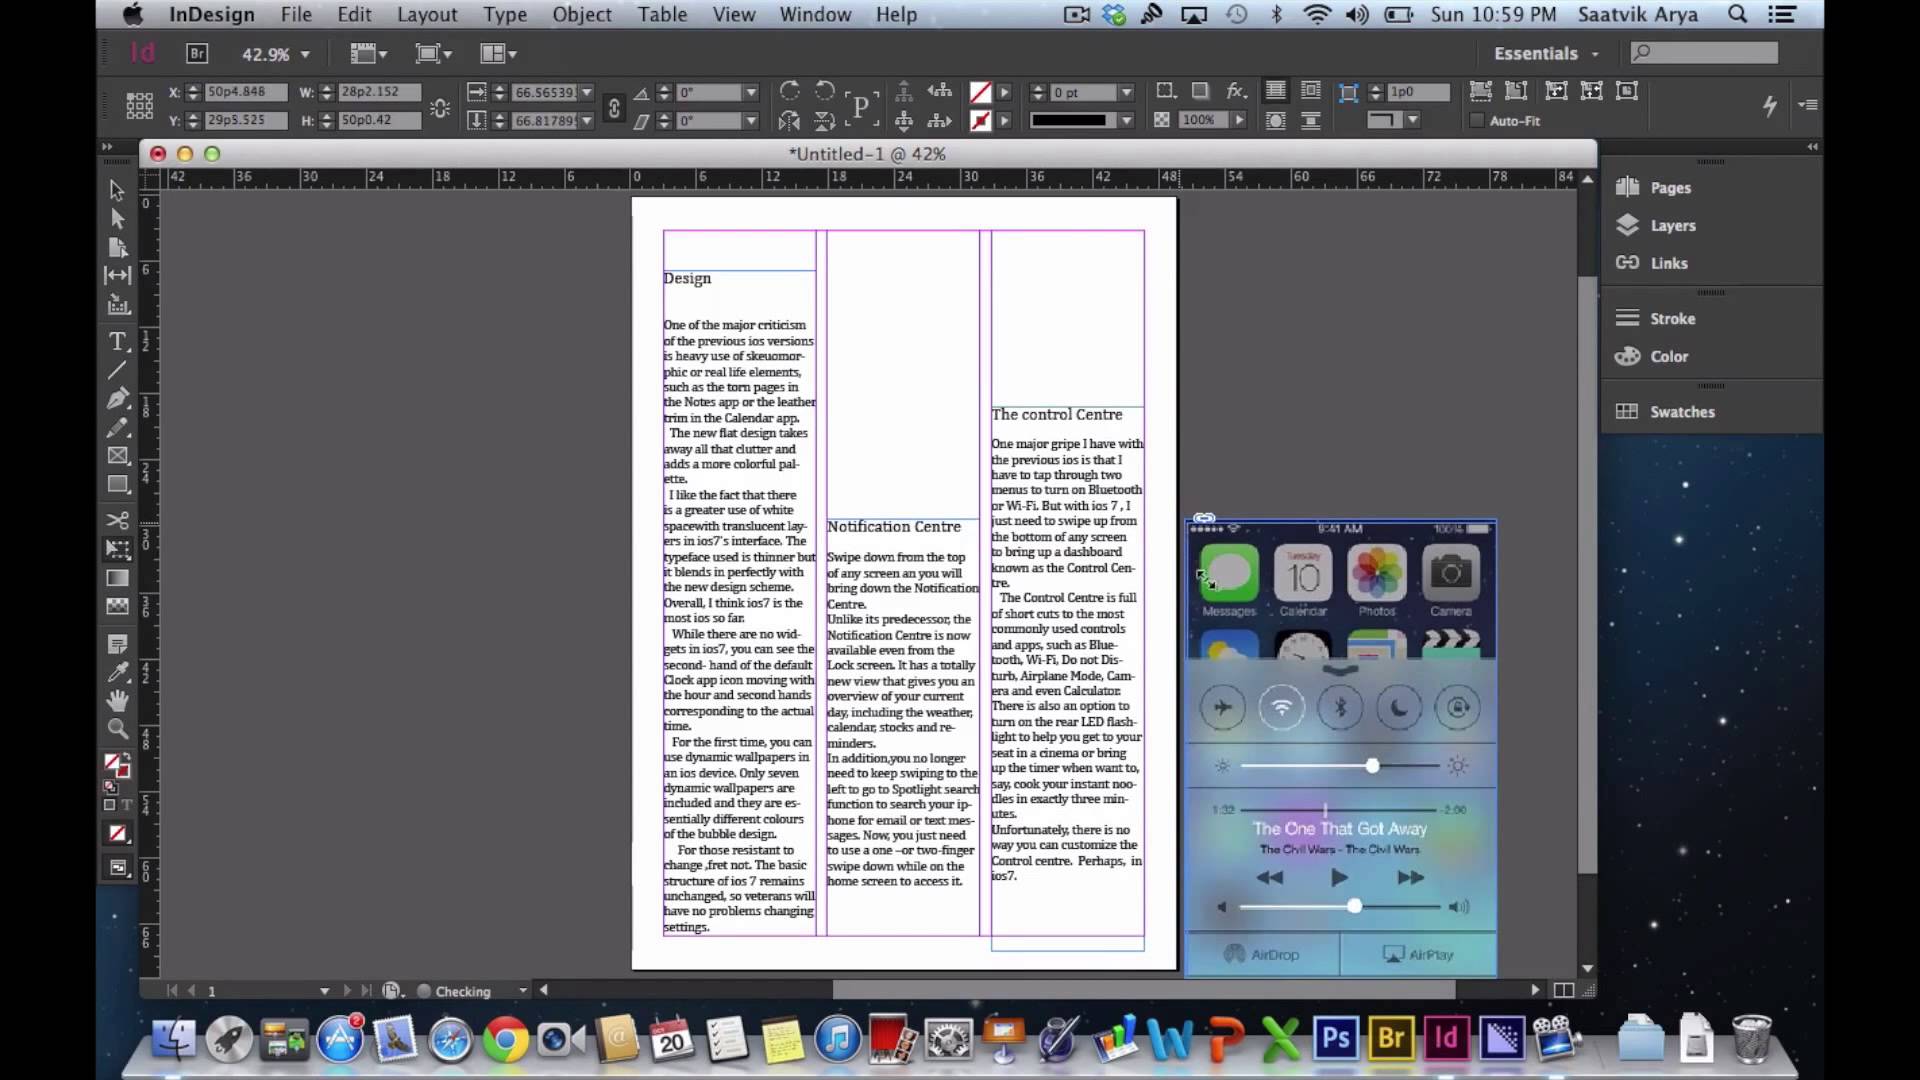 indesign for mac 2015